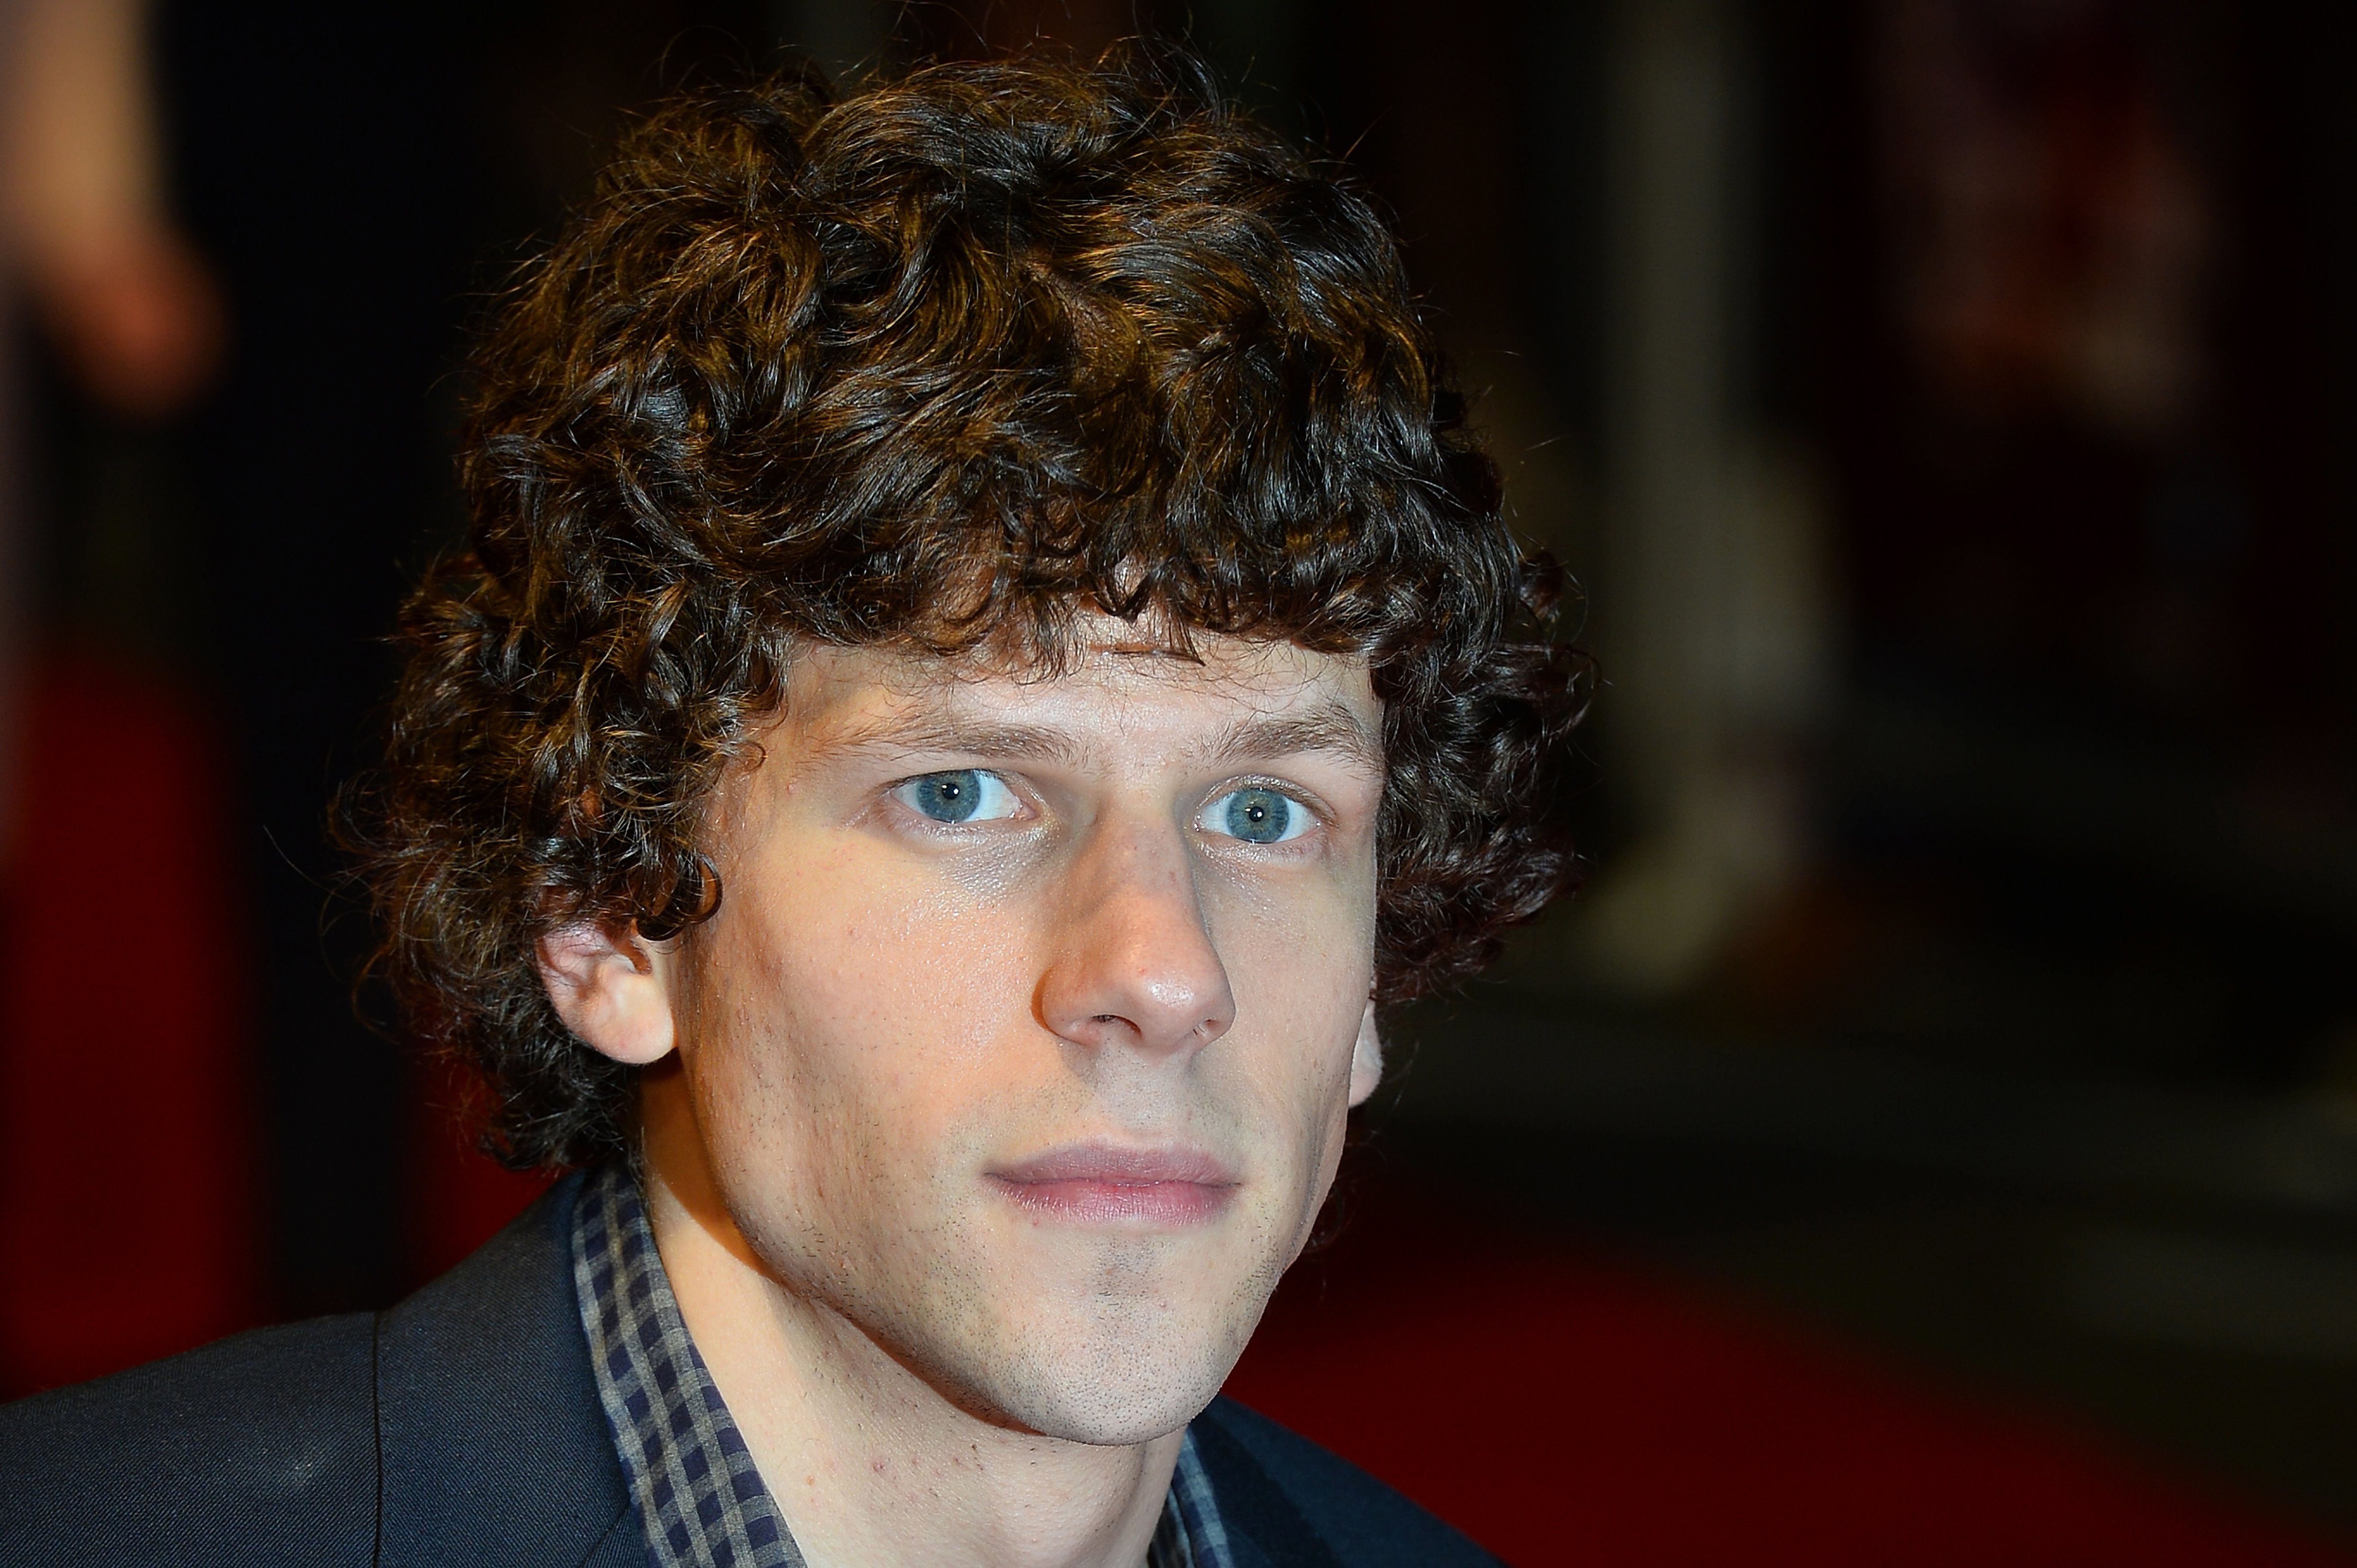 Jesse Eisenberg attends the European premiere of his film 'The Double' during the London Film Festival in central London on October 12, 2013. (Ben Stansall—AFP/Getty Images)